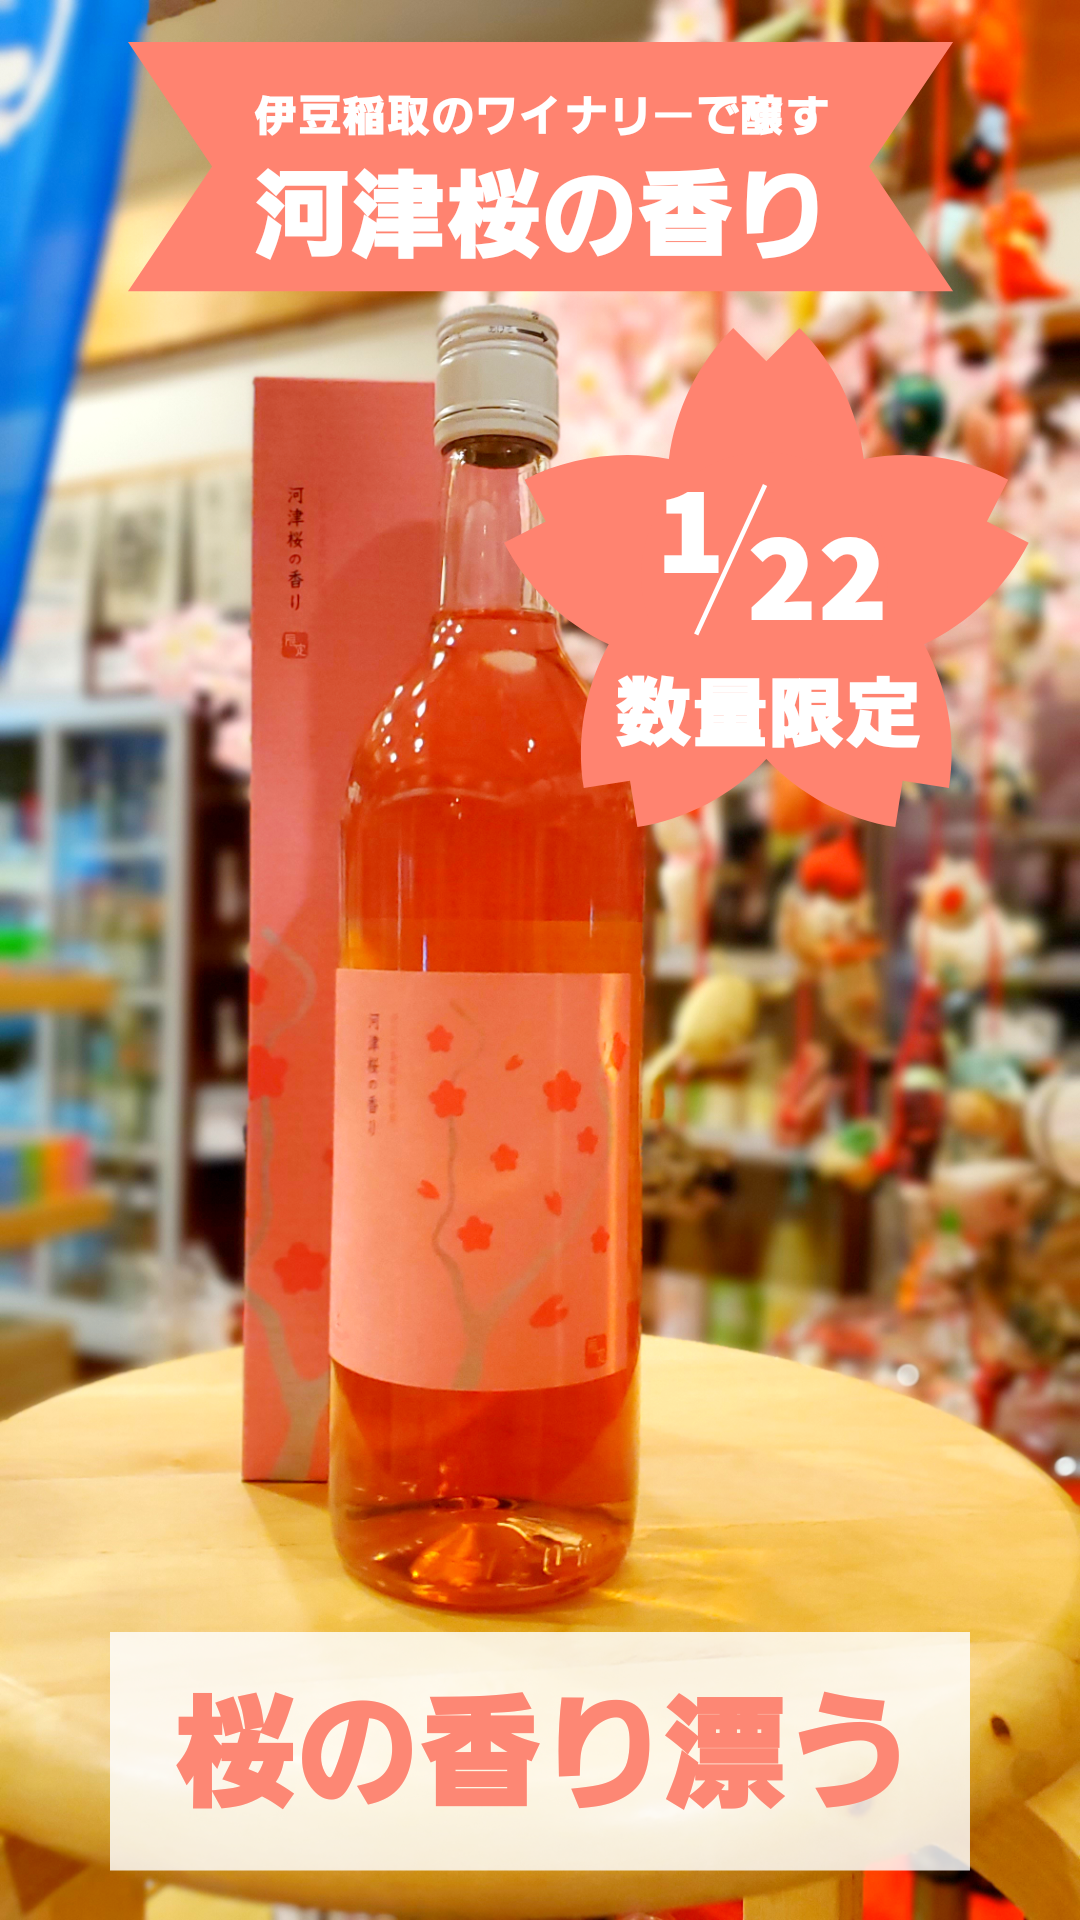 You are currently viewing 春味第二弾は河津桜の香り